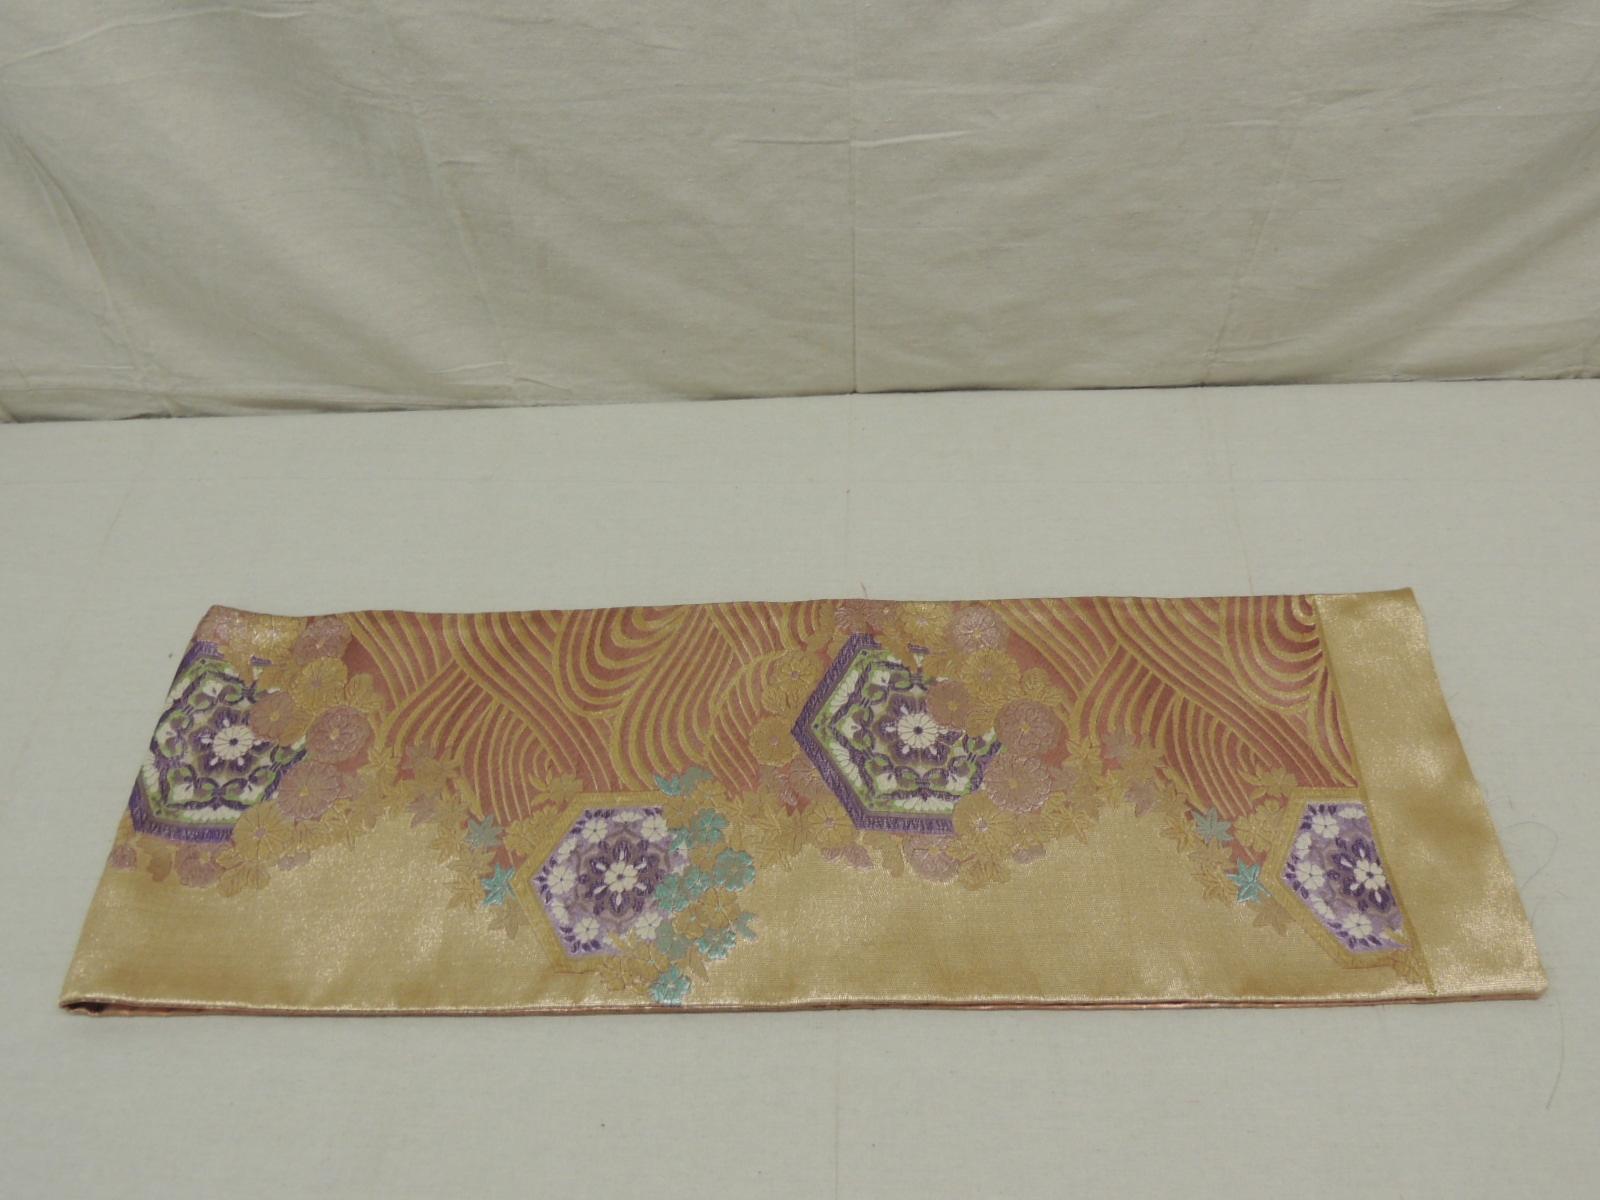 Silk Long Golden Textured Woven Obi Textile Depicting Flowers in Bloom